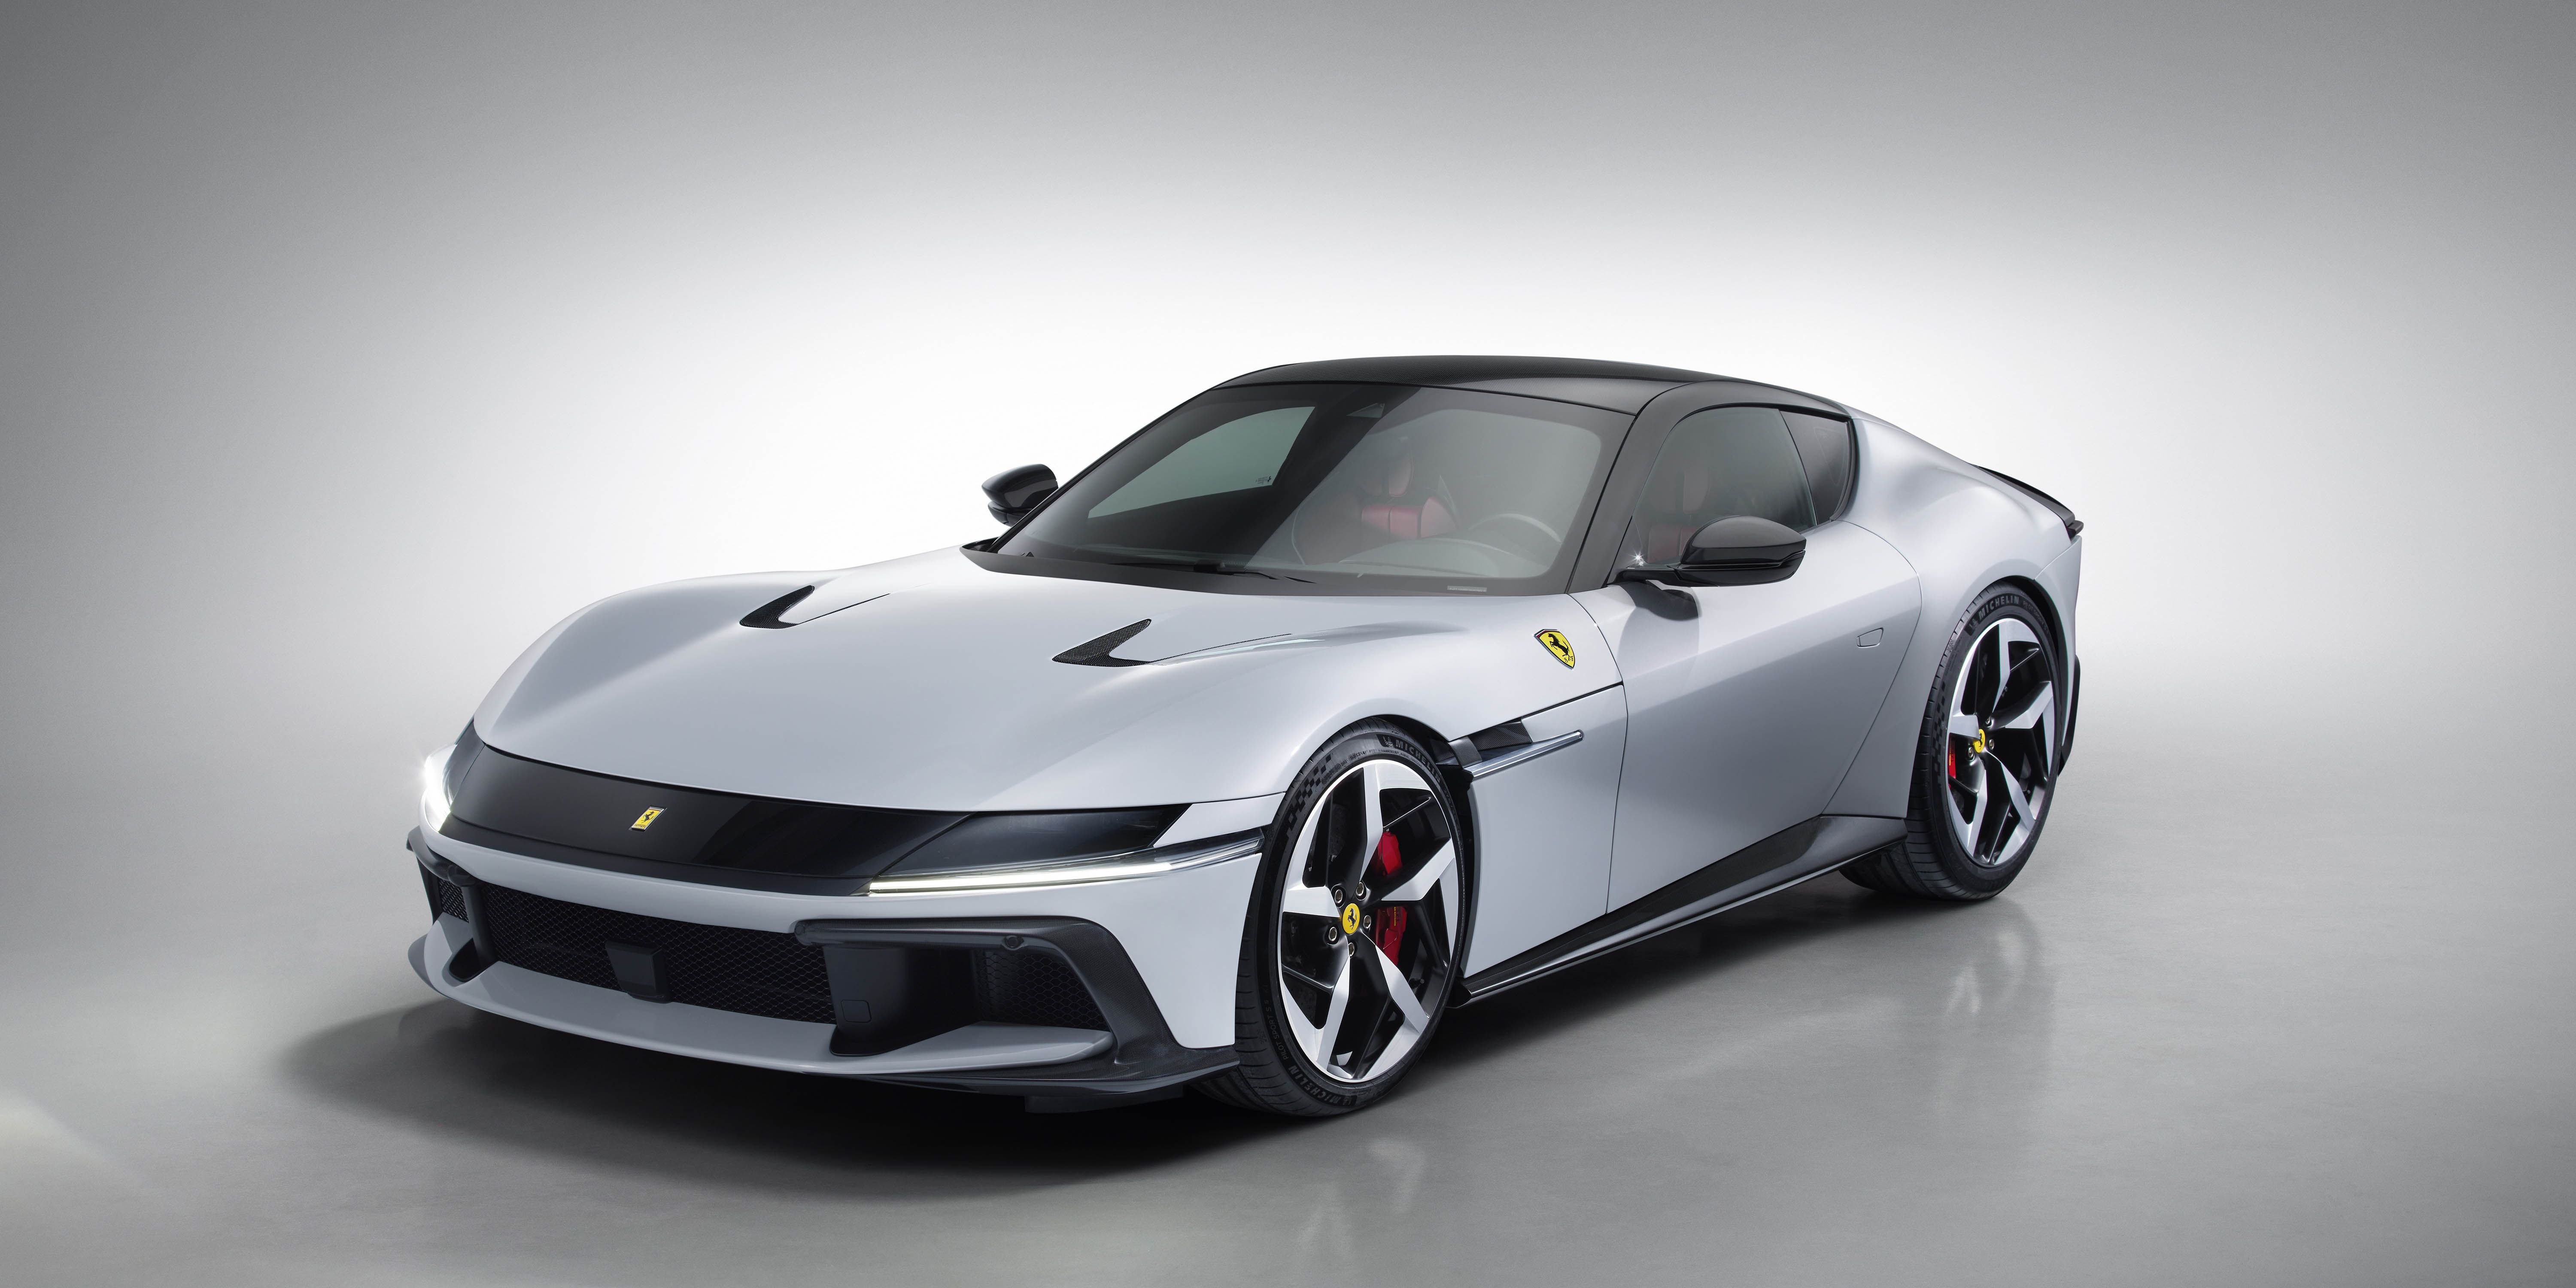 Ferrari 12Cilindri Keeps the Naturally Aspirated V-12 Alive with Funky Looks